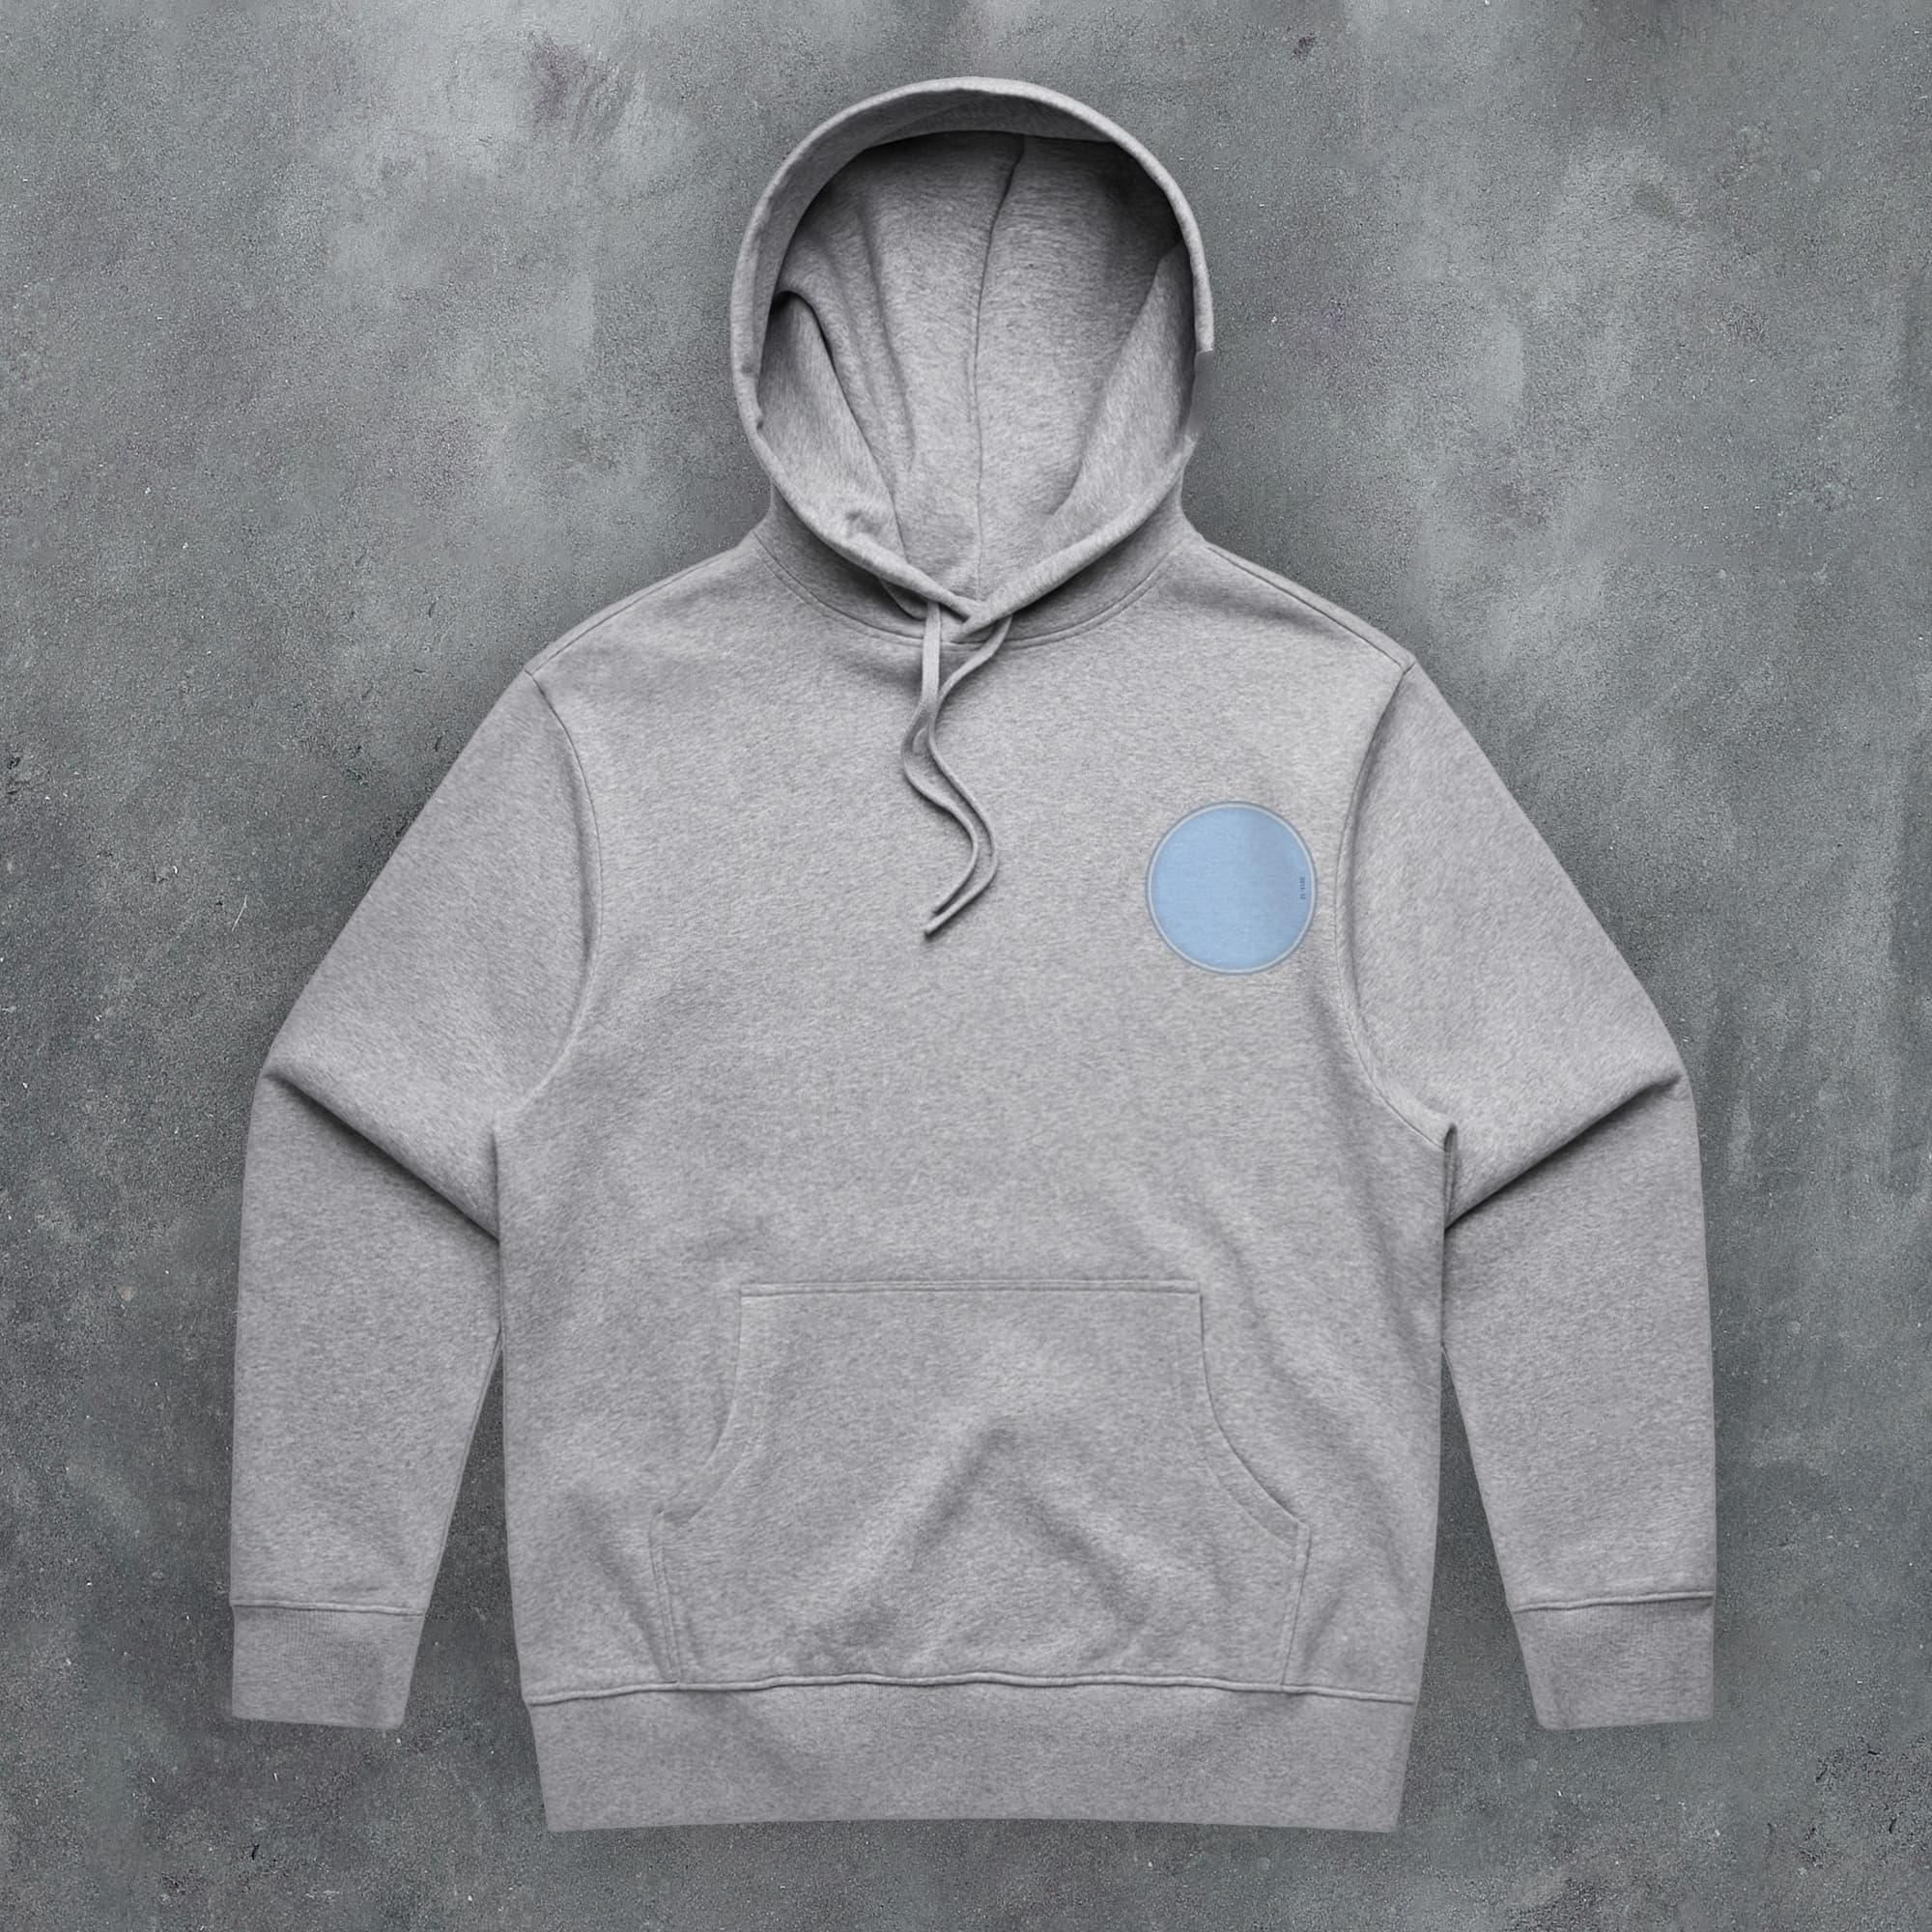 a grey hoodie with a blue circle on it